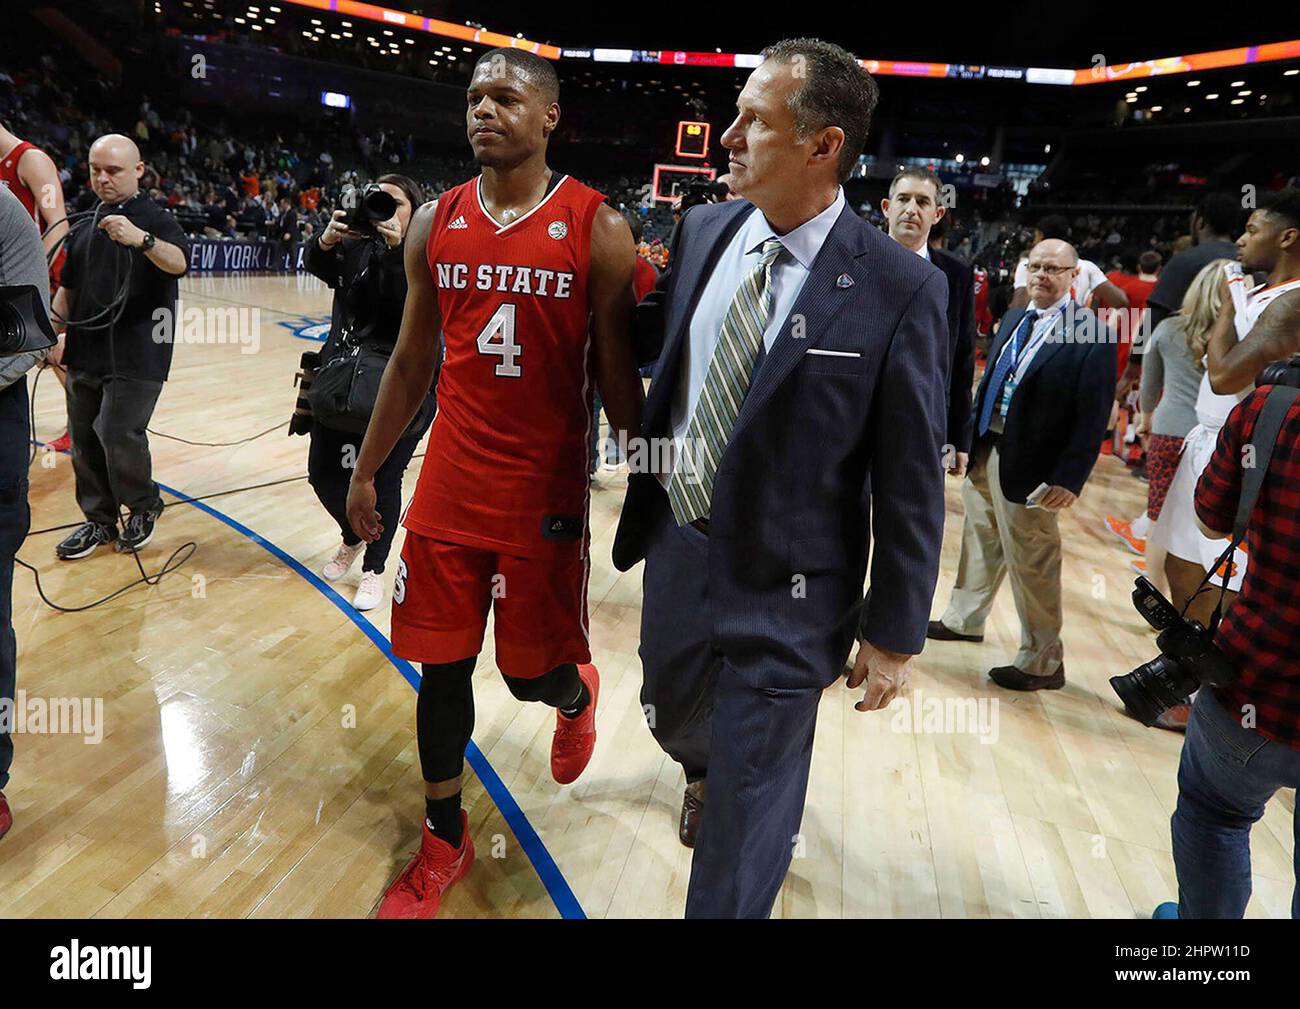 New York, USA. 07th Mar, 2017. In this file photo, North Carolina State head coach Mark Gottfried walks off the floor with Dennis Smith Jr. (Photo by 4) after a 75-61 loss against Clemson in the first round of the ACC Tournament at the Barclays Center in Brooklyn, N.Y., on March 7, 2017. (Photo by Ethan Hyman/Raleigh News & Observer/TNS/Sipa USA) Credit: Sipa USA/Alamy Live News Stock Photo